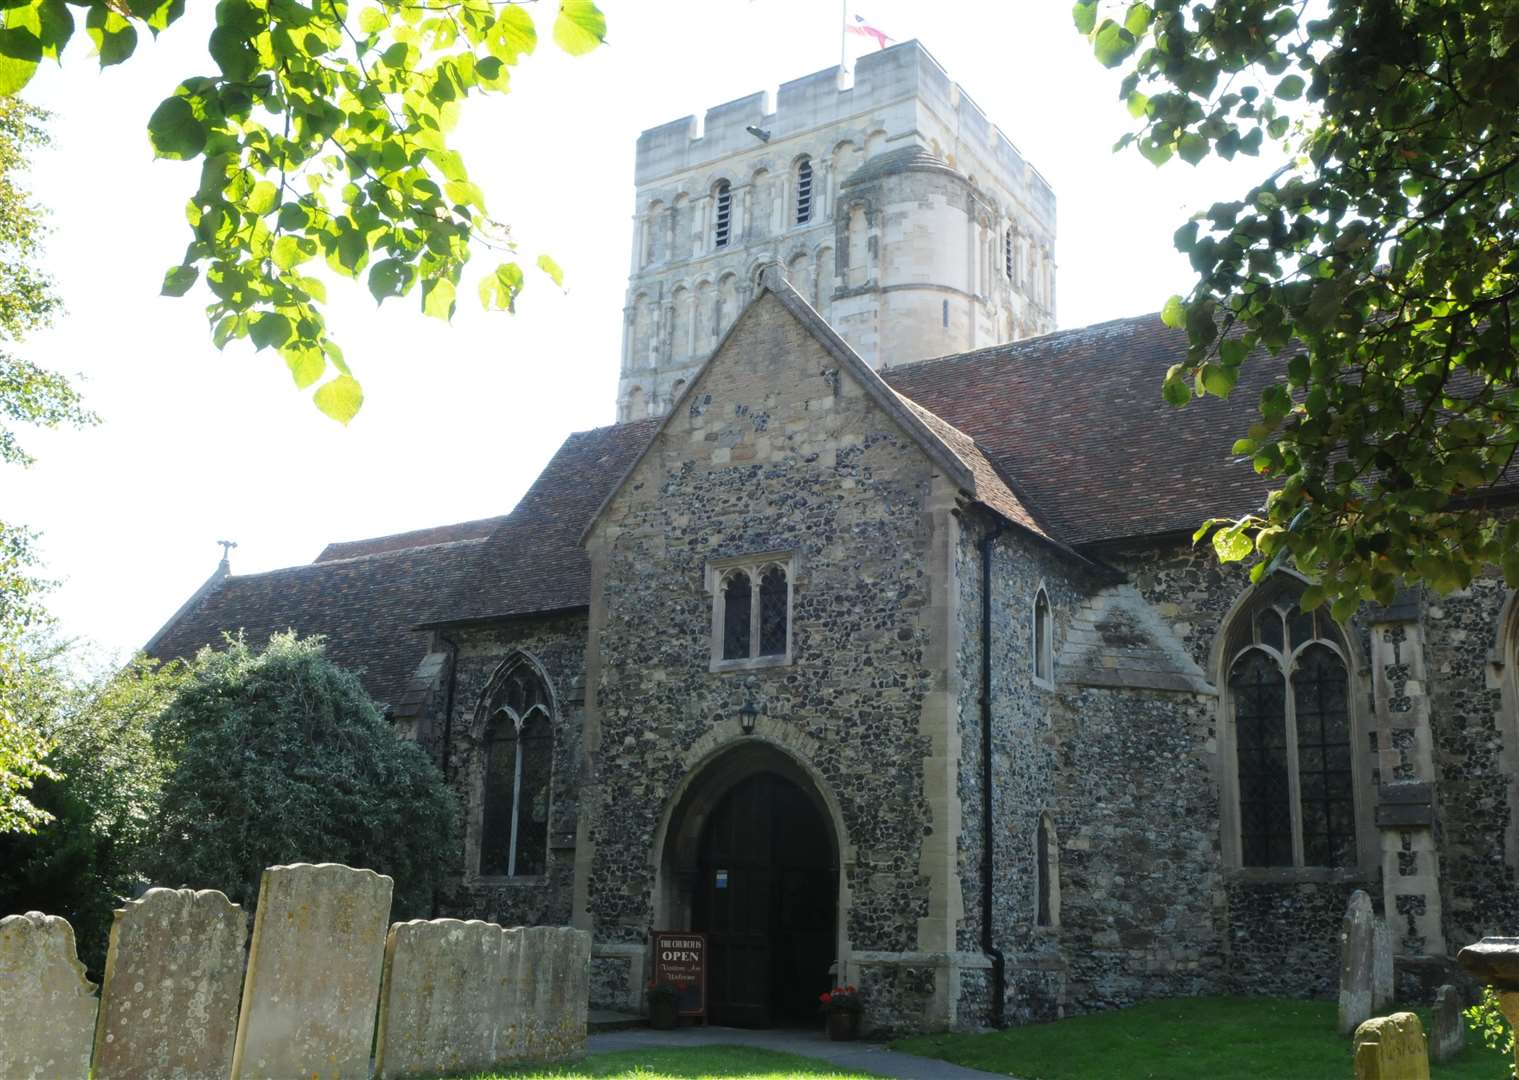 St Clement's Church in Sandwich had to extend its graveyard for plague victims